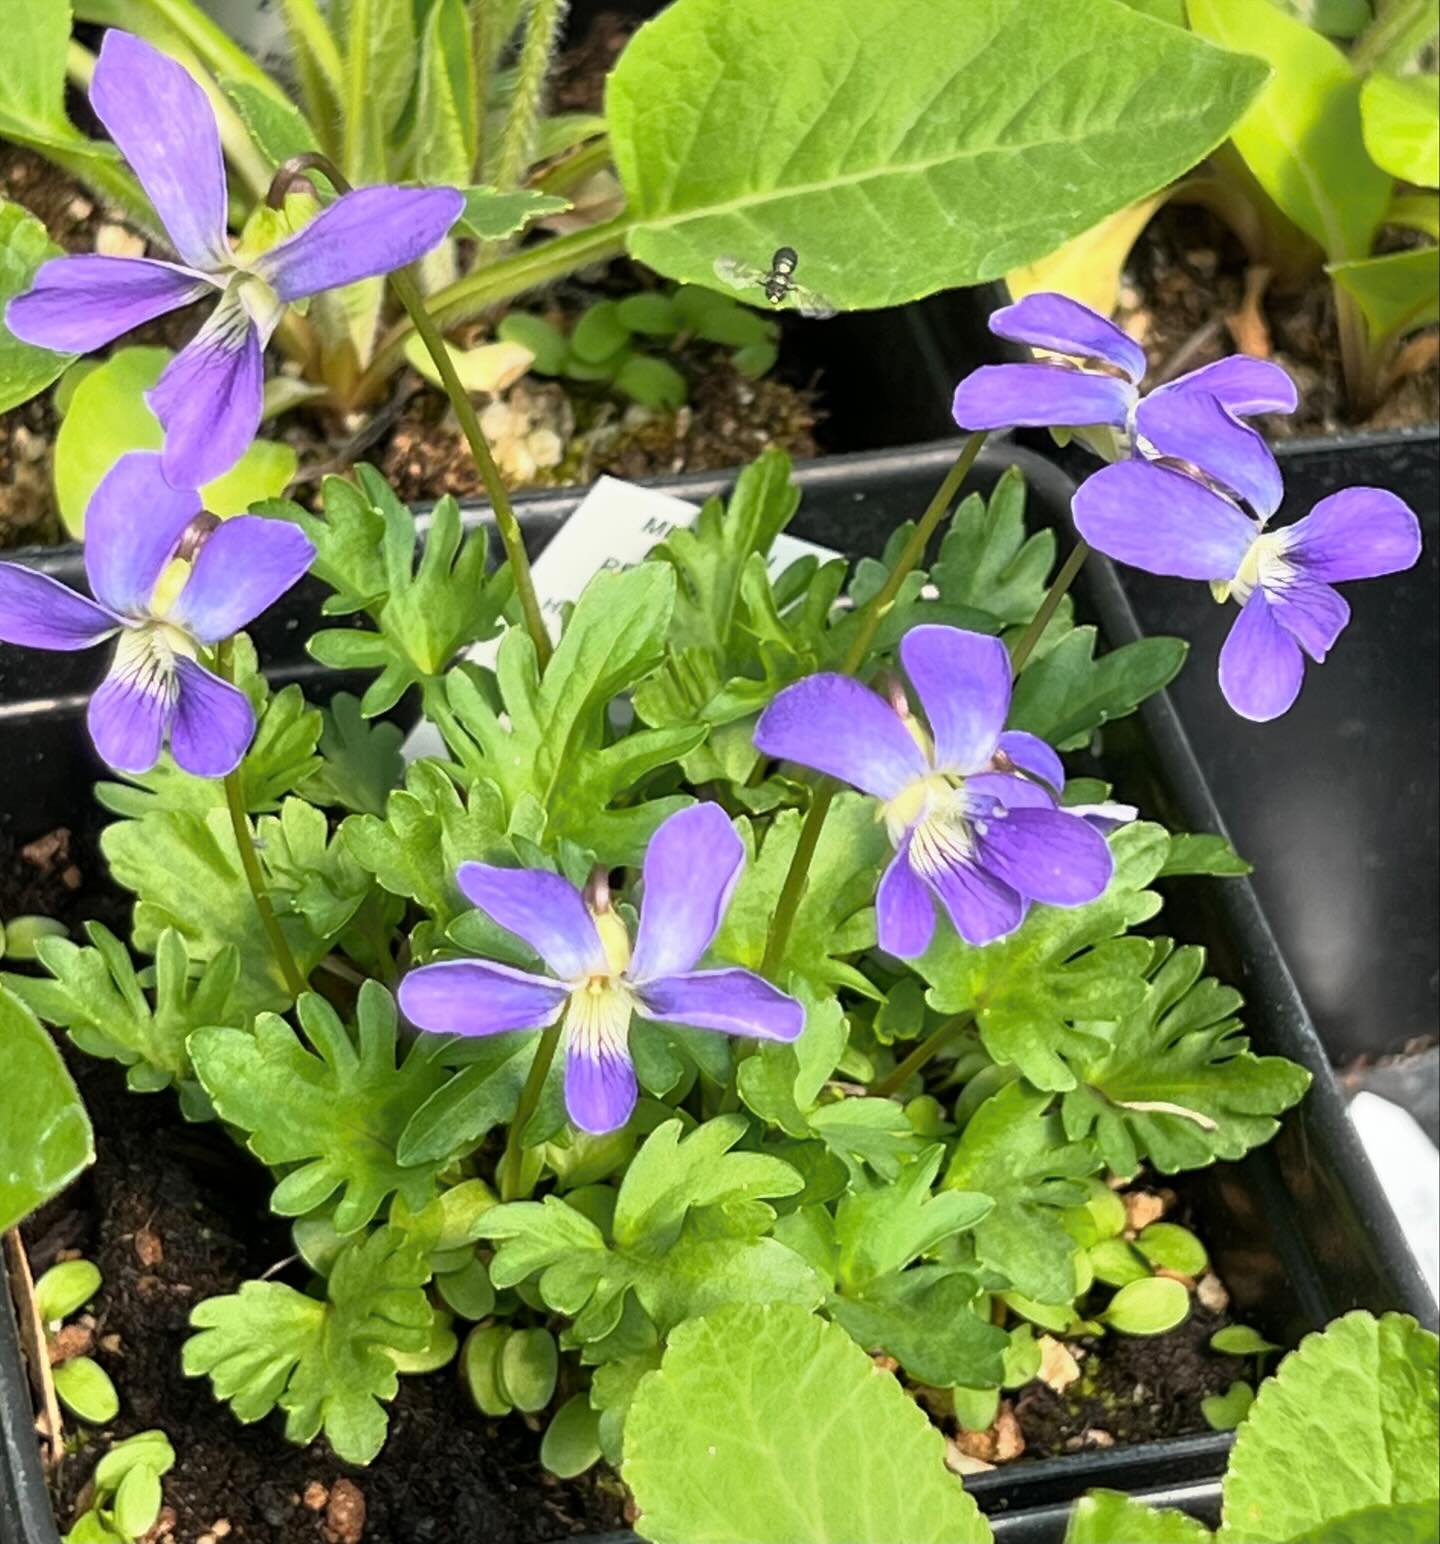 This violet is rather unique in Michigan. Sally found this violet on her land.  She had a young botanist come to ID plants on her property and initially it was labeled Viola palmata (Wood Violet) because it bore the closest resemblance in Michigan Fl